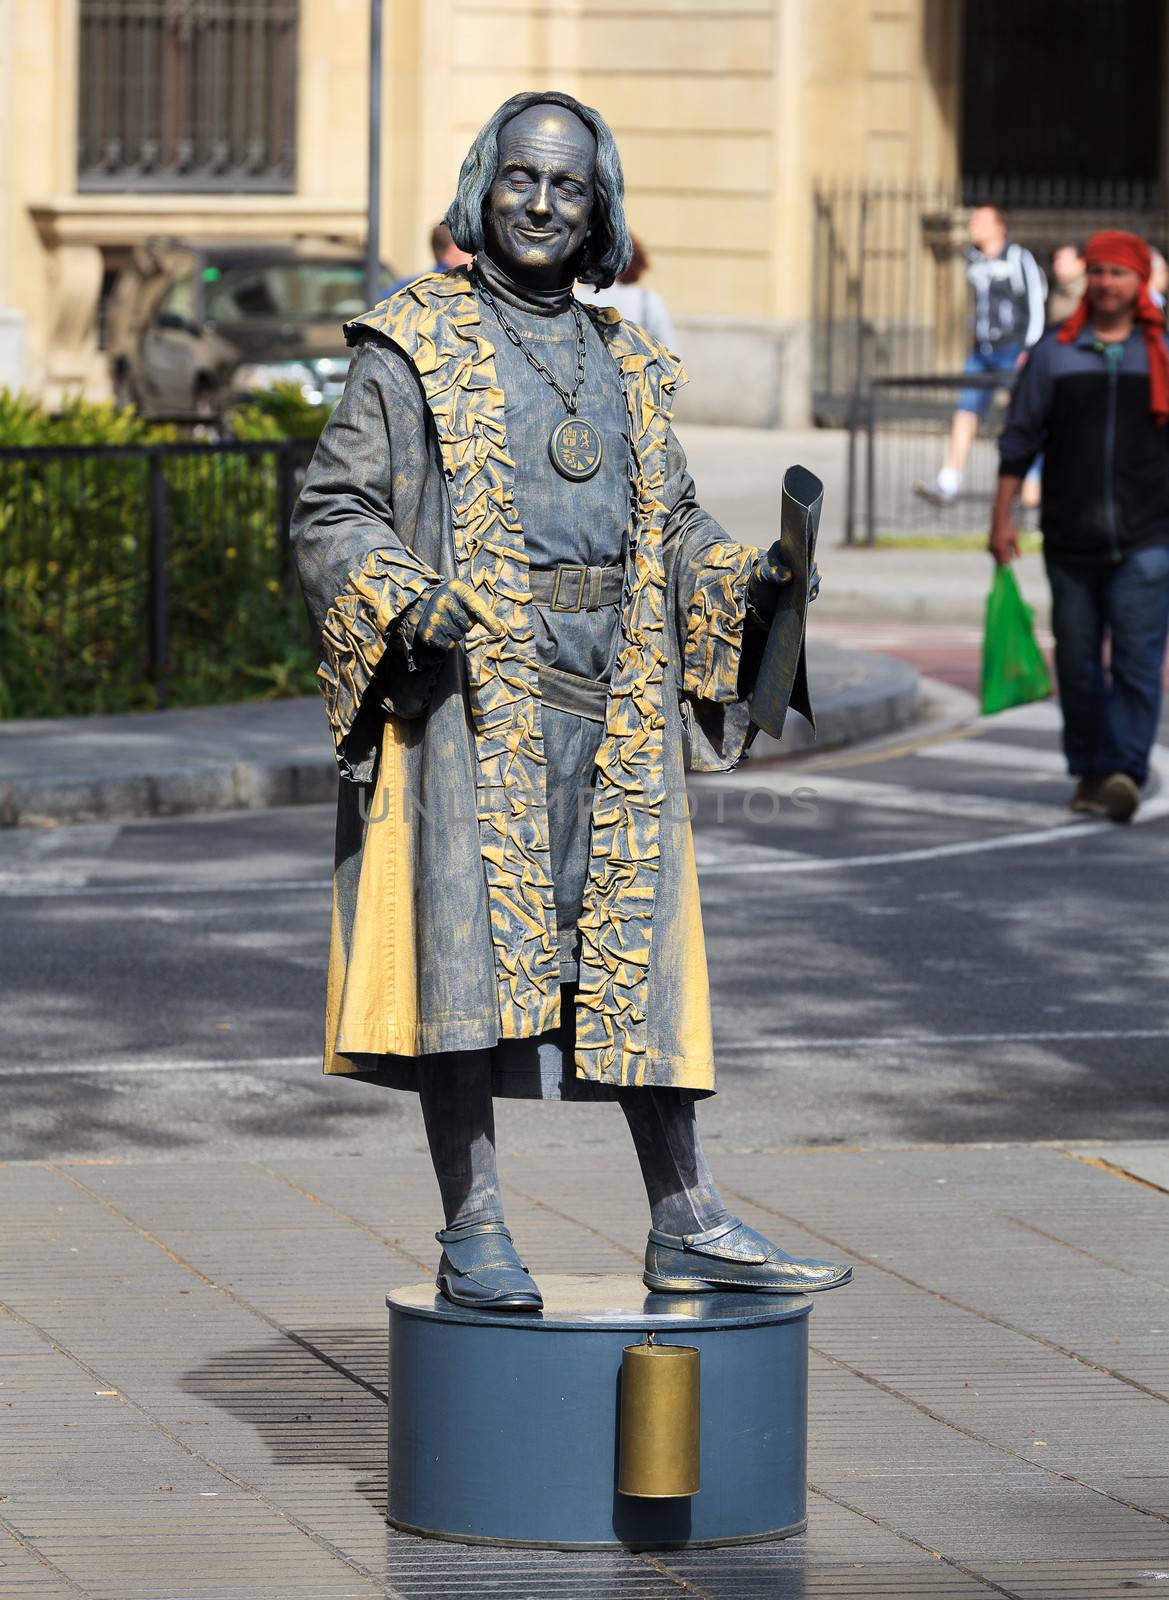 Human statue dressed as Christopher Columbus by Nobilior